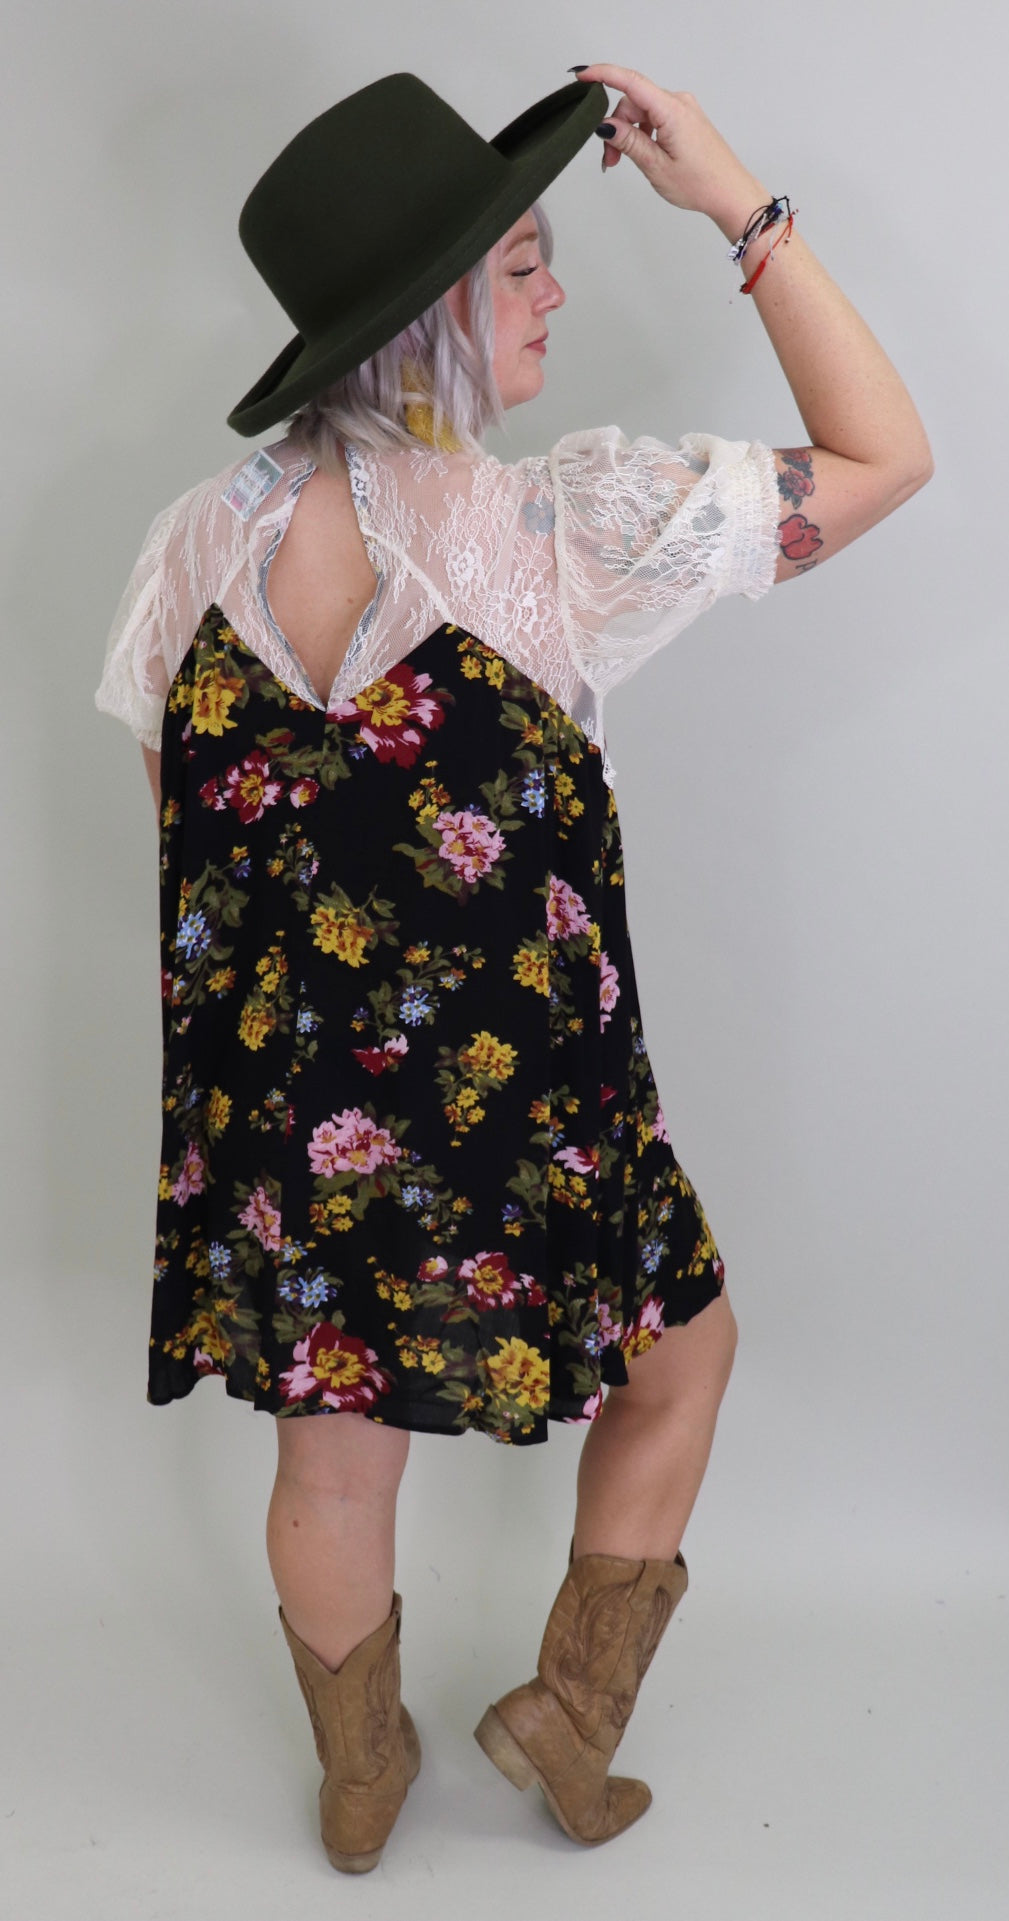 Last Call High Neck Lace Floral Dress